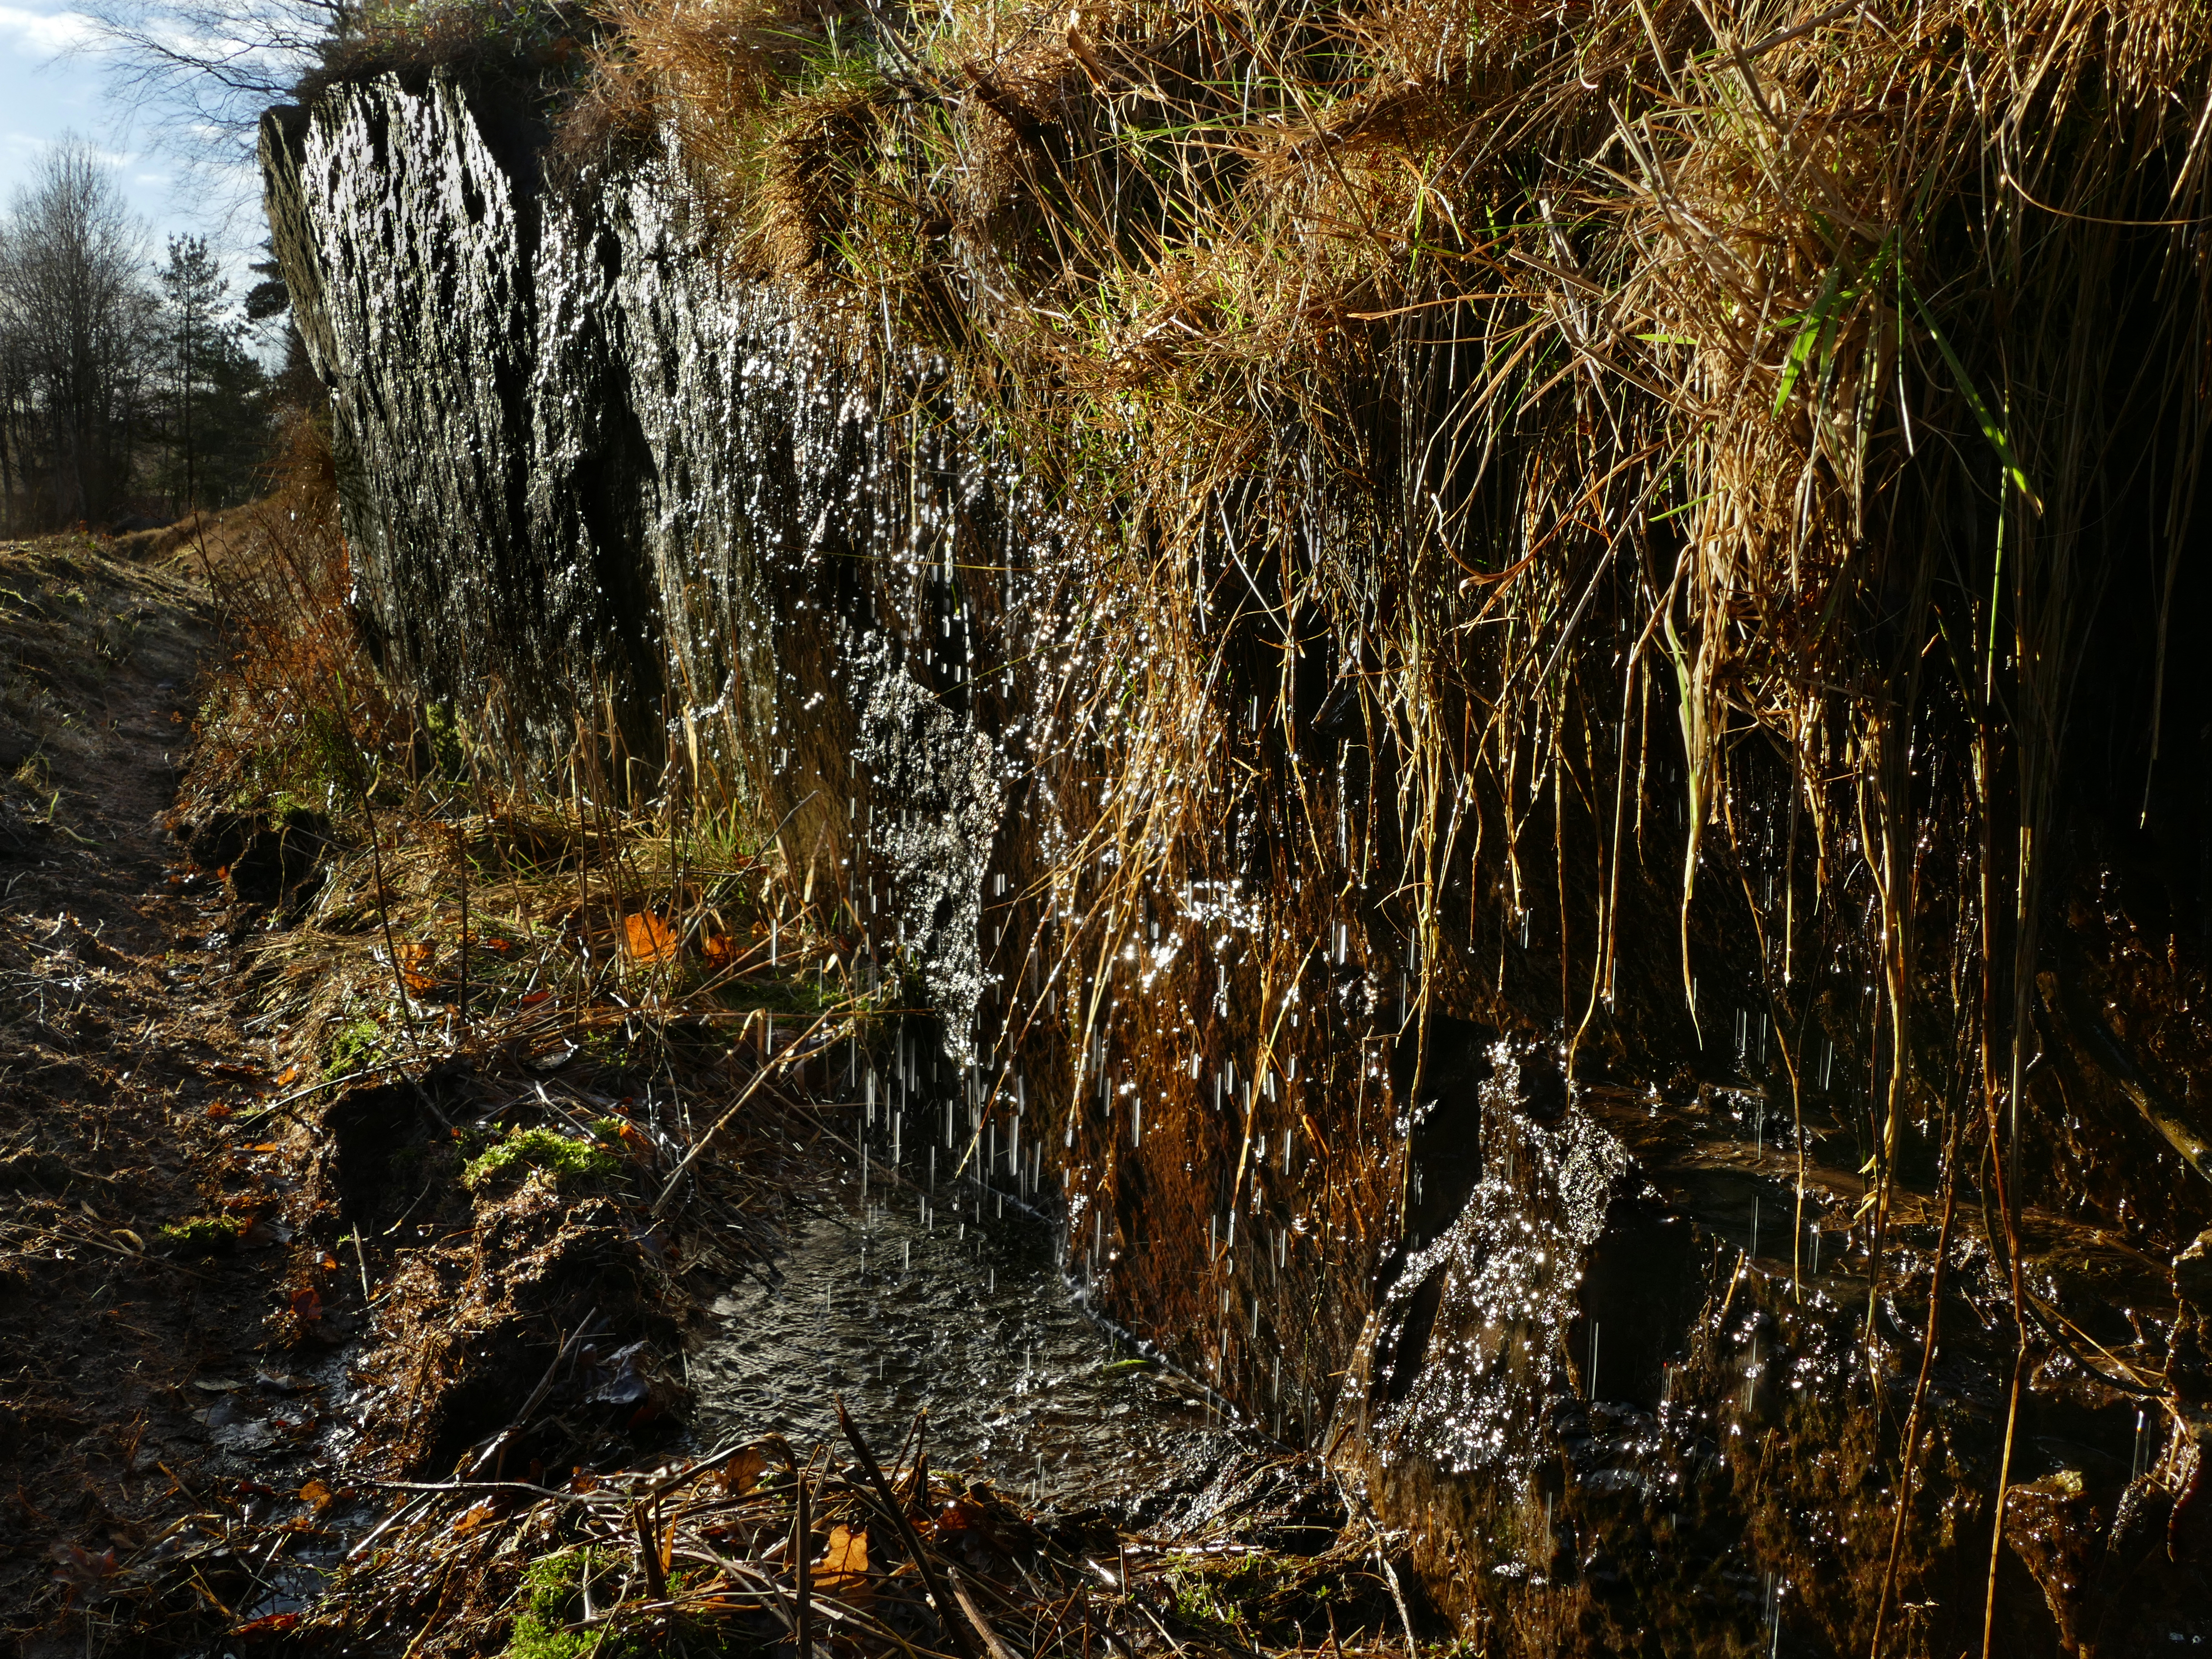 Drainage water from a forested area dripping into a ditch 1